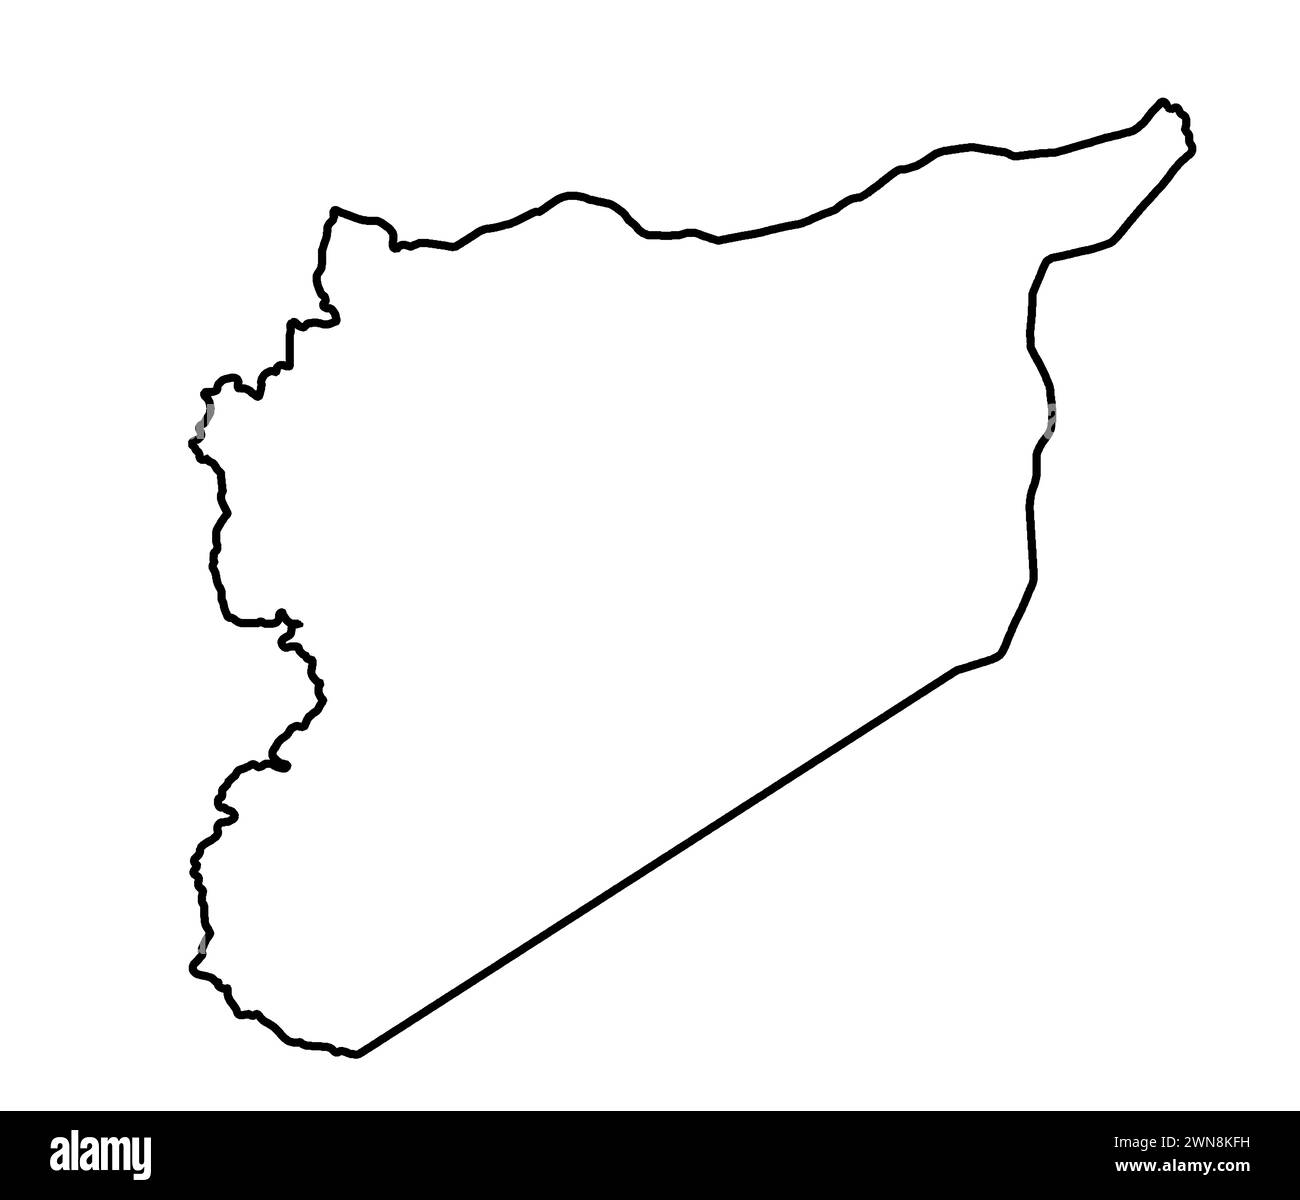 Outline silhouette map of Syria over a white background Stock Photo